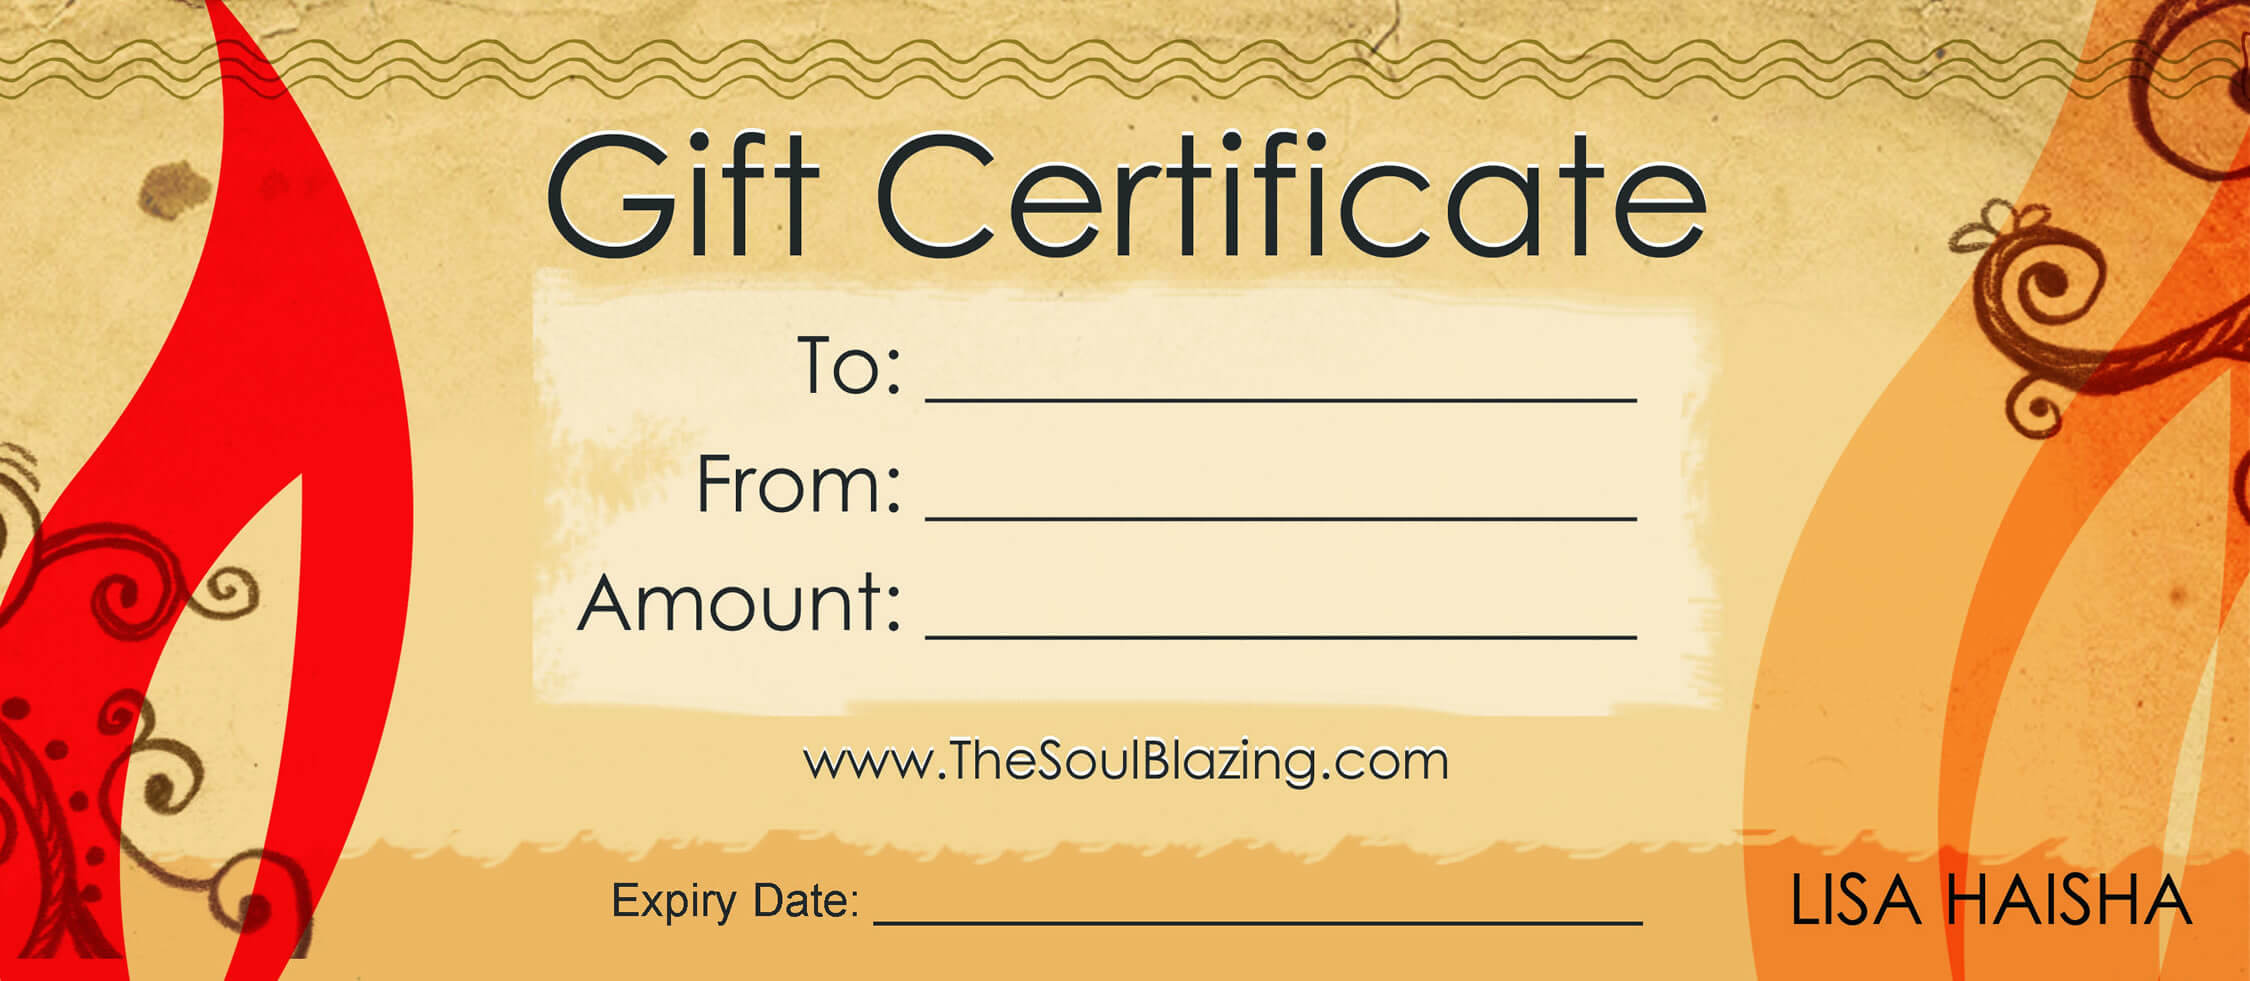 Gift Certificates With Regard To Restaurant Gift Certificate Template